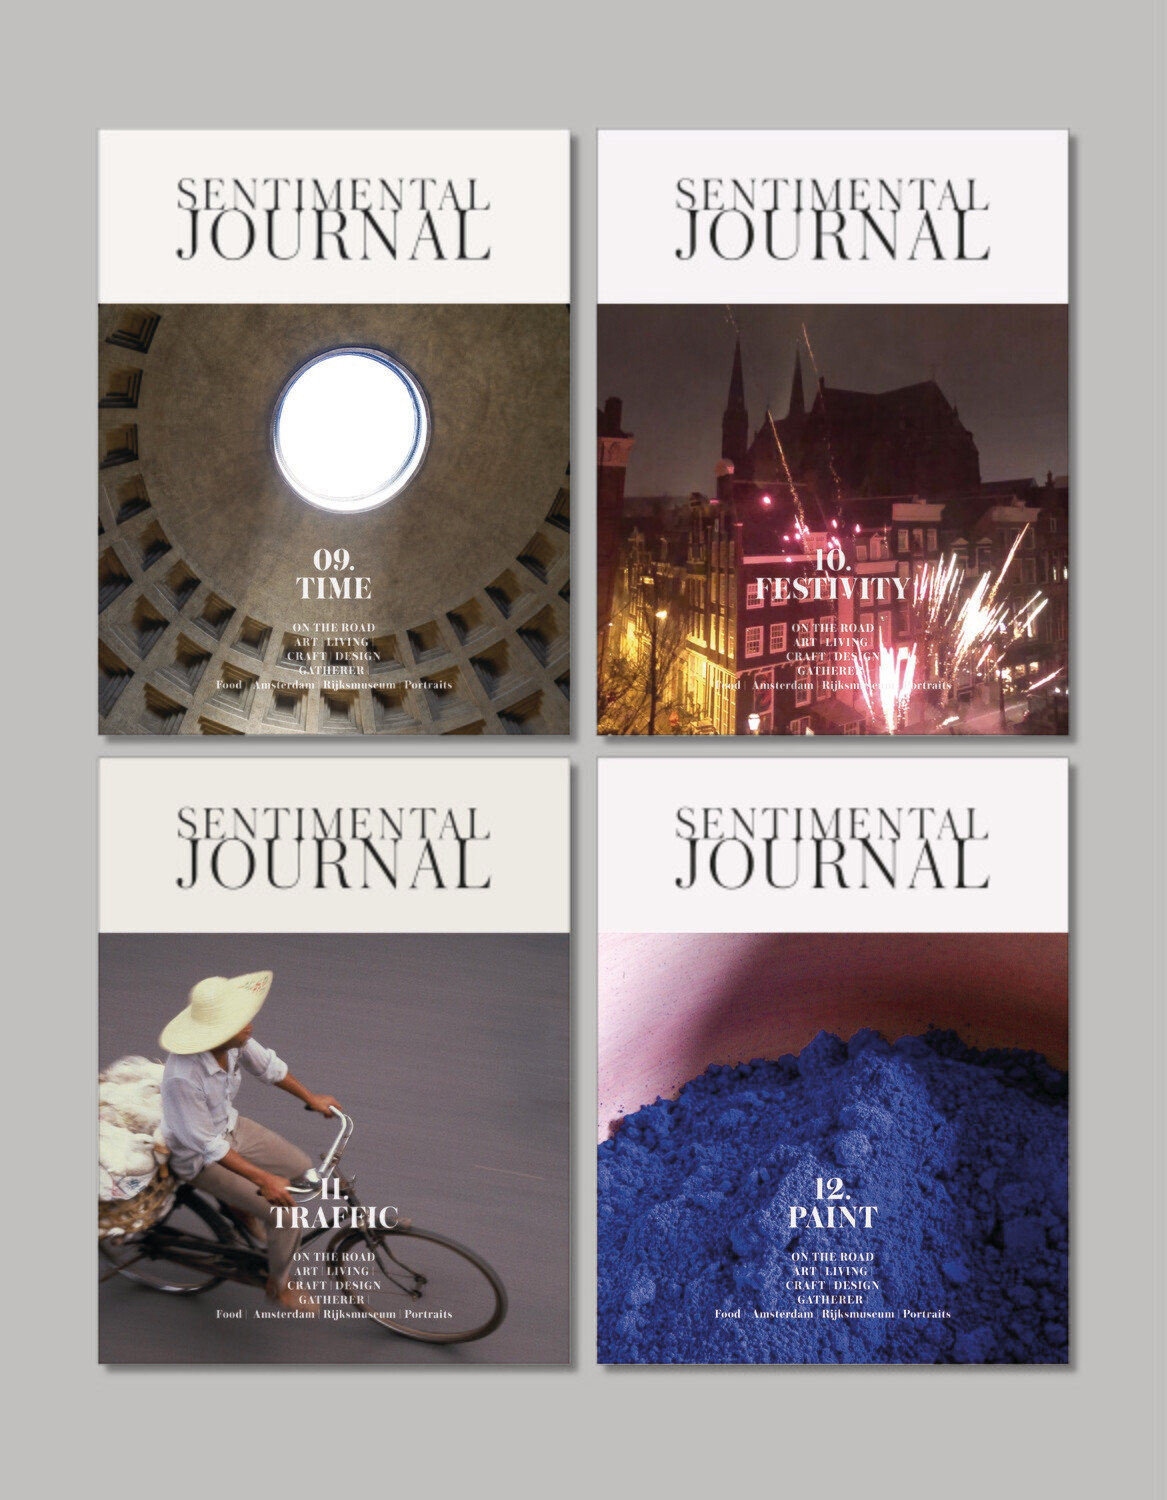 SJ 1-year subscription 
(4 volumes starts from 09.Time)